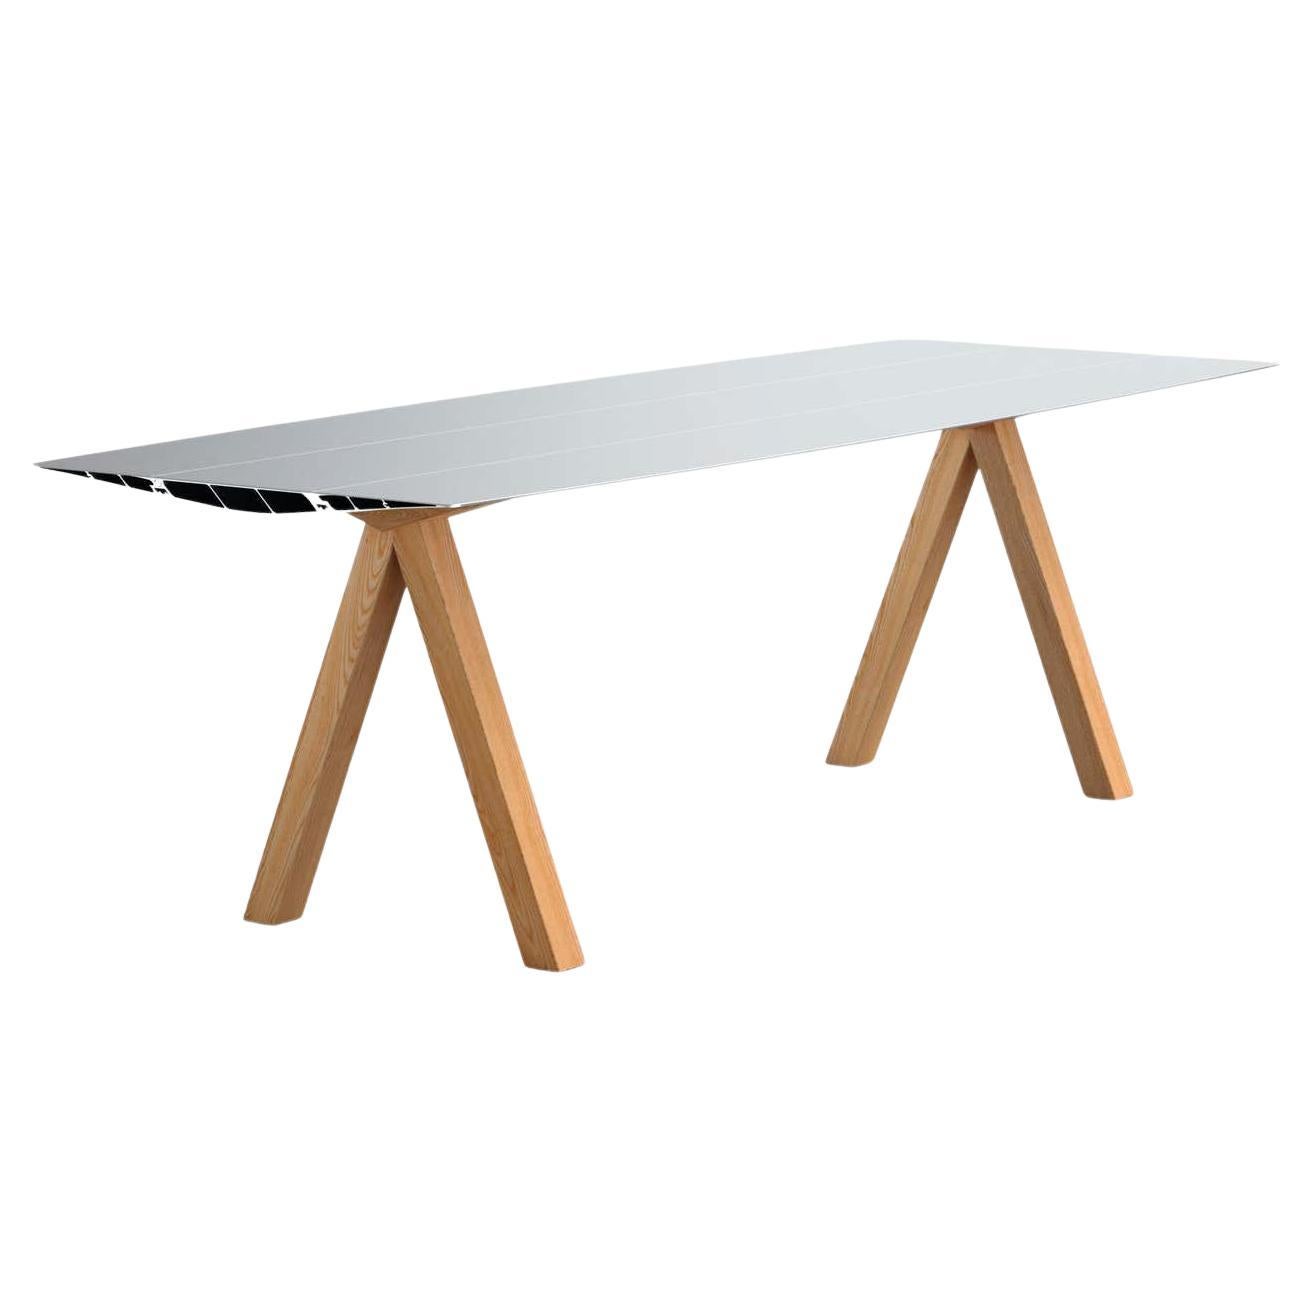 Dinning Table B 90cm x 200cm Aluminum Anodized Silver Top Wooden Legs For Sale